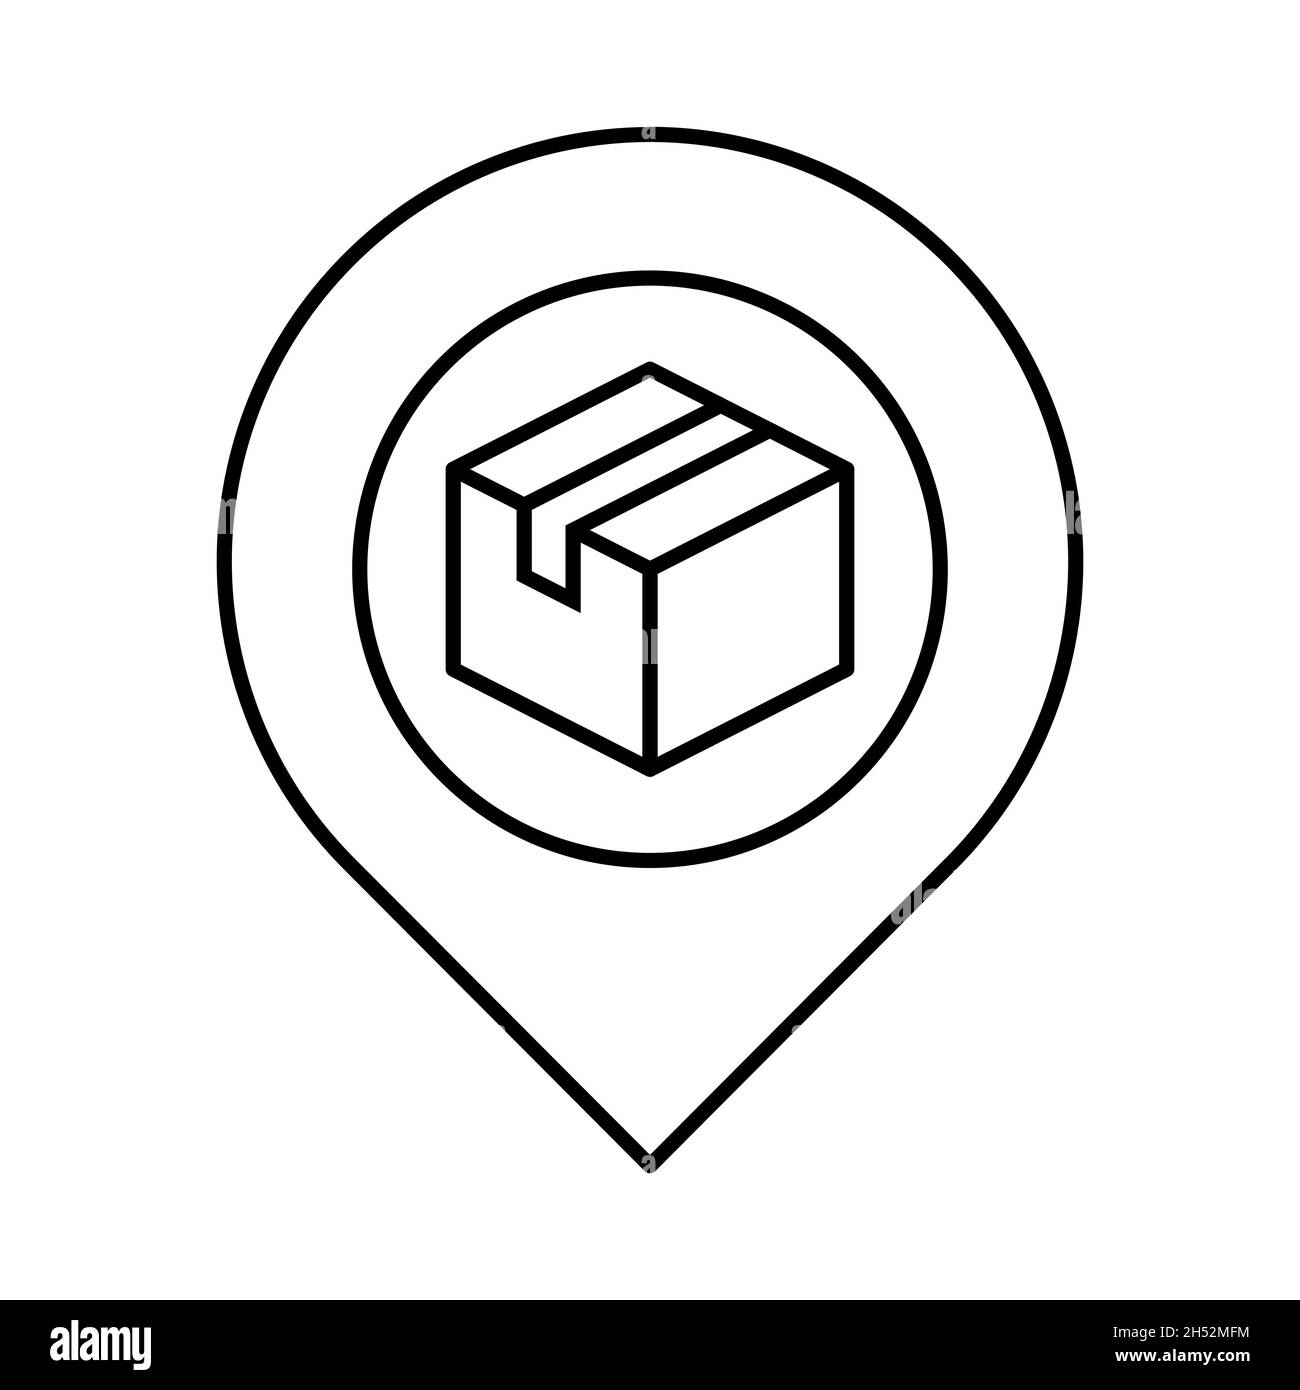 Delivery box with map pin line icon. Tracking order symbol. Cardboard box inside map marker. Track package idea. Shipping, transportation. Vector Stock Vector